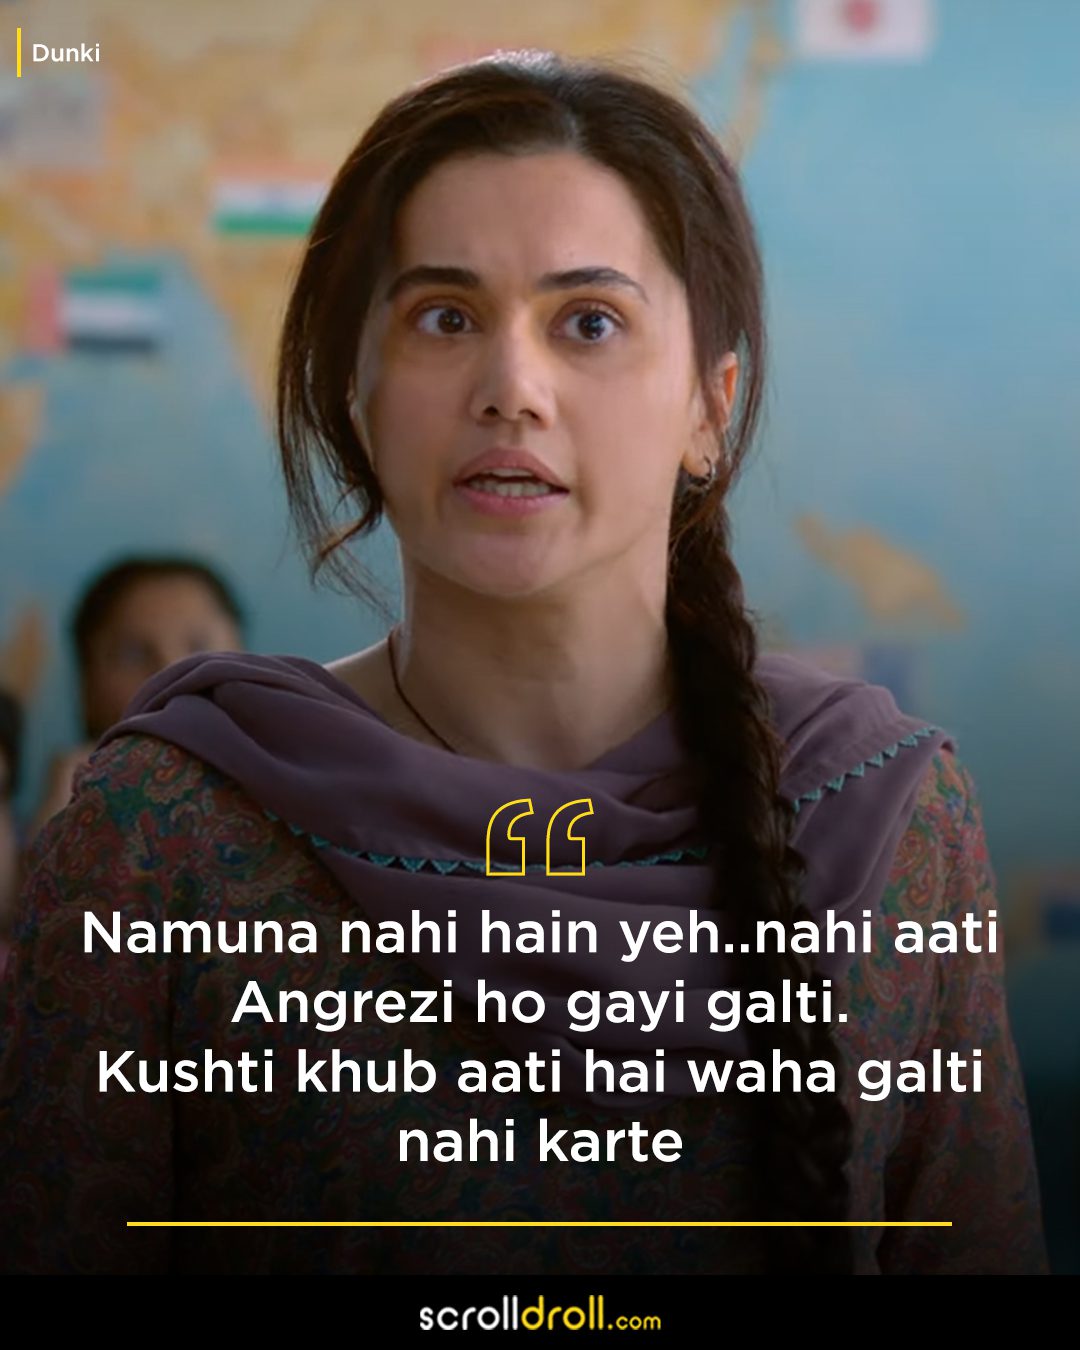 9 Best Dialogues From Dunki That Are Winning Our Hearts